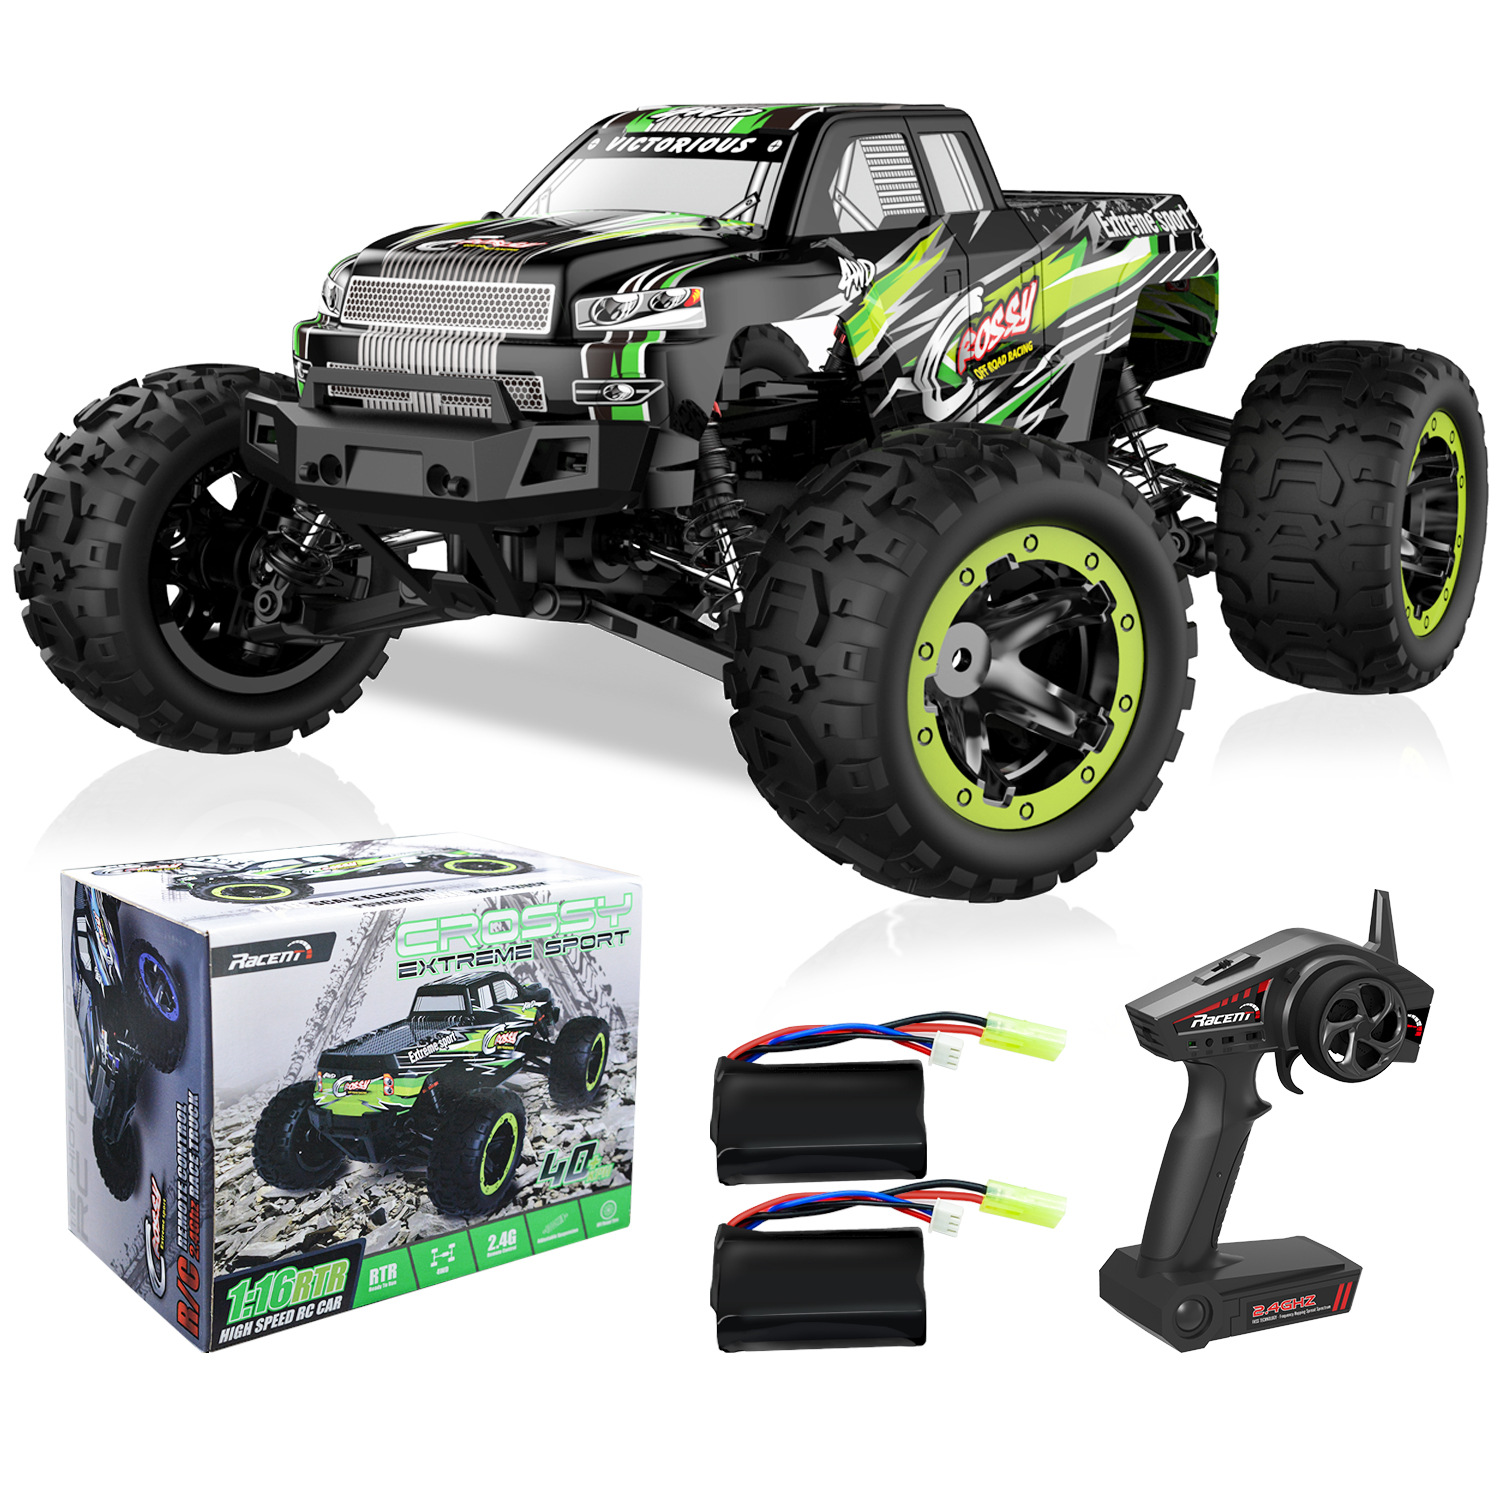 Cross-Border 1:16 High-Speed Climbing All-Terrain Remote Control Car Drift off-Road Vehicle Four-Wheel Drive Monster Truck Electric Toy Car